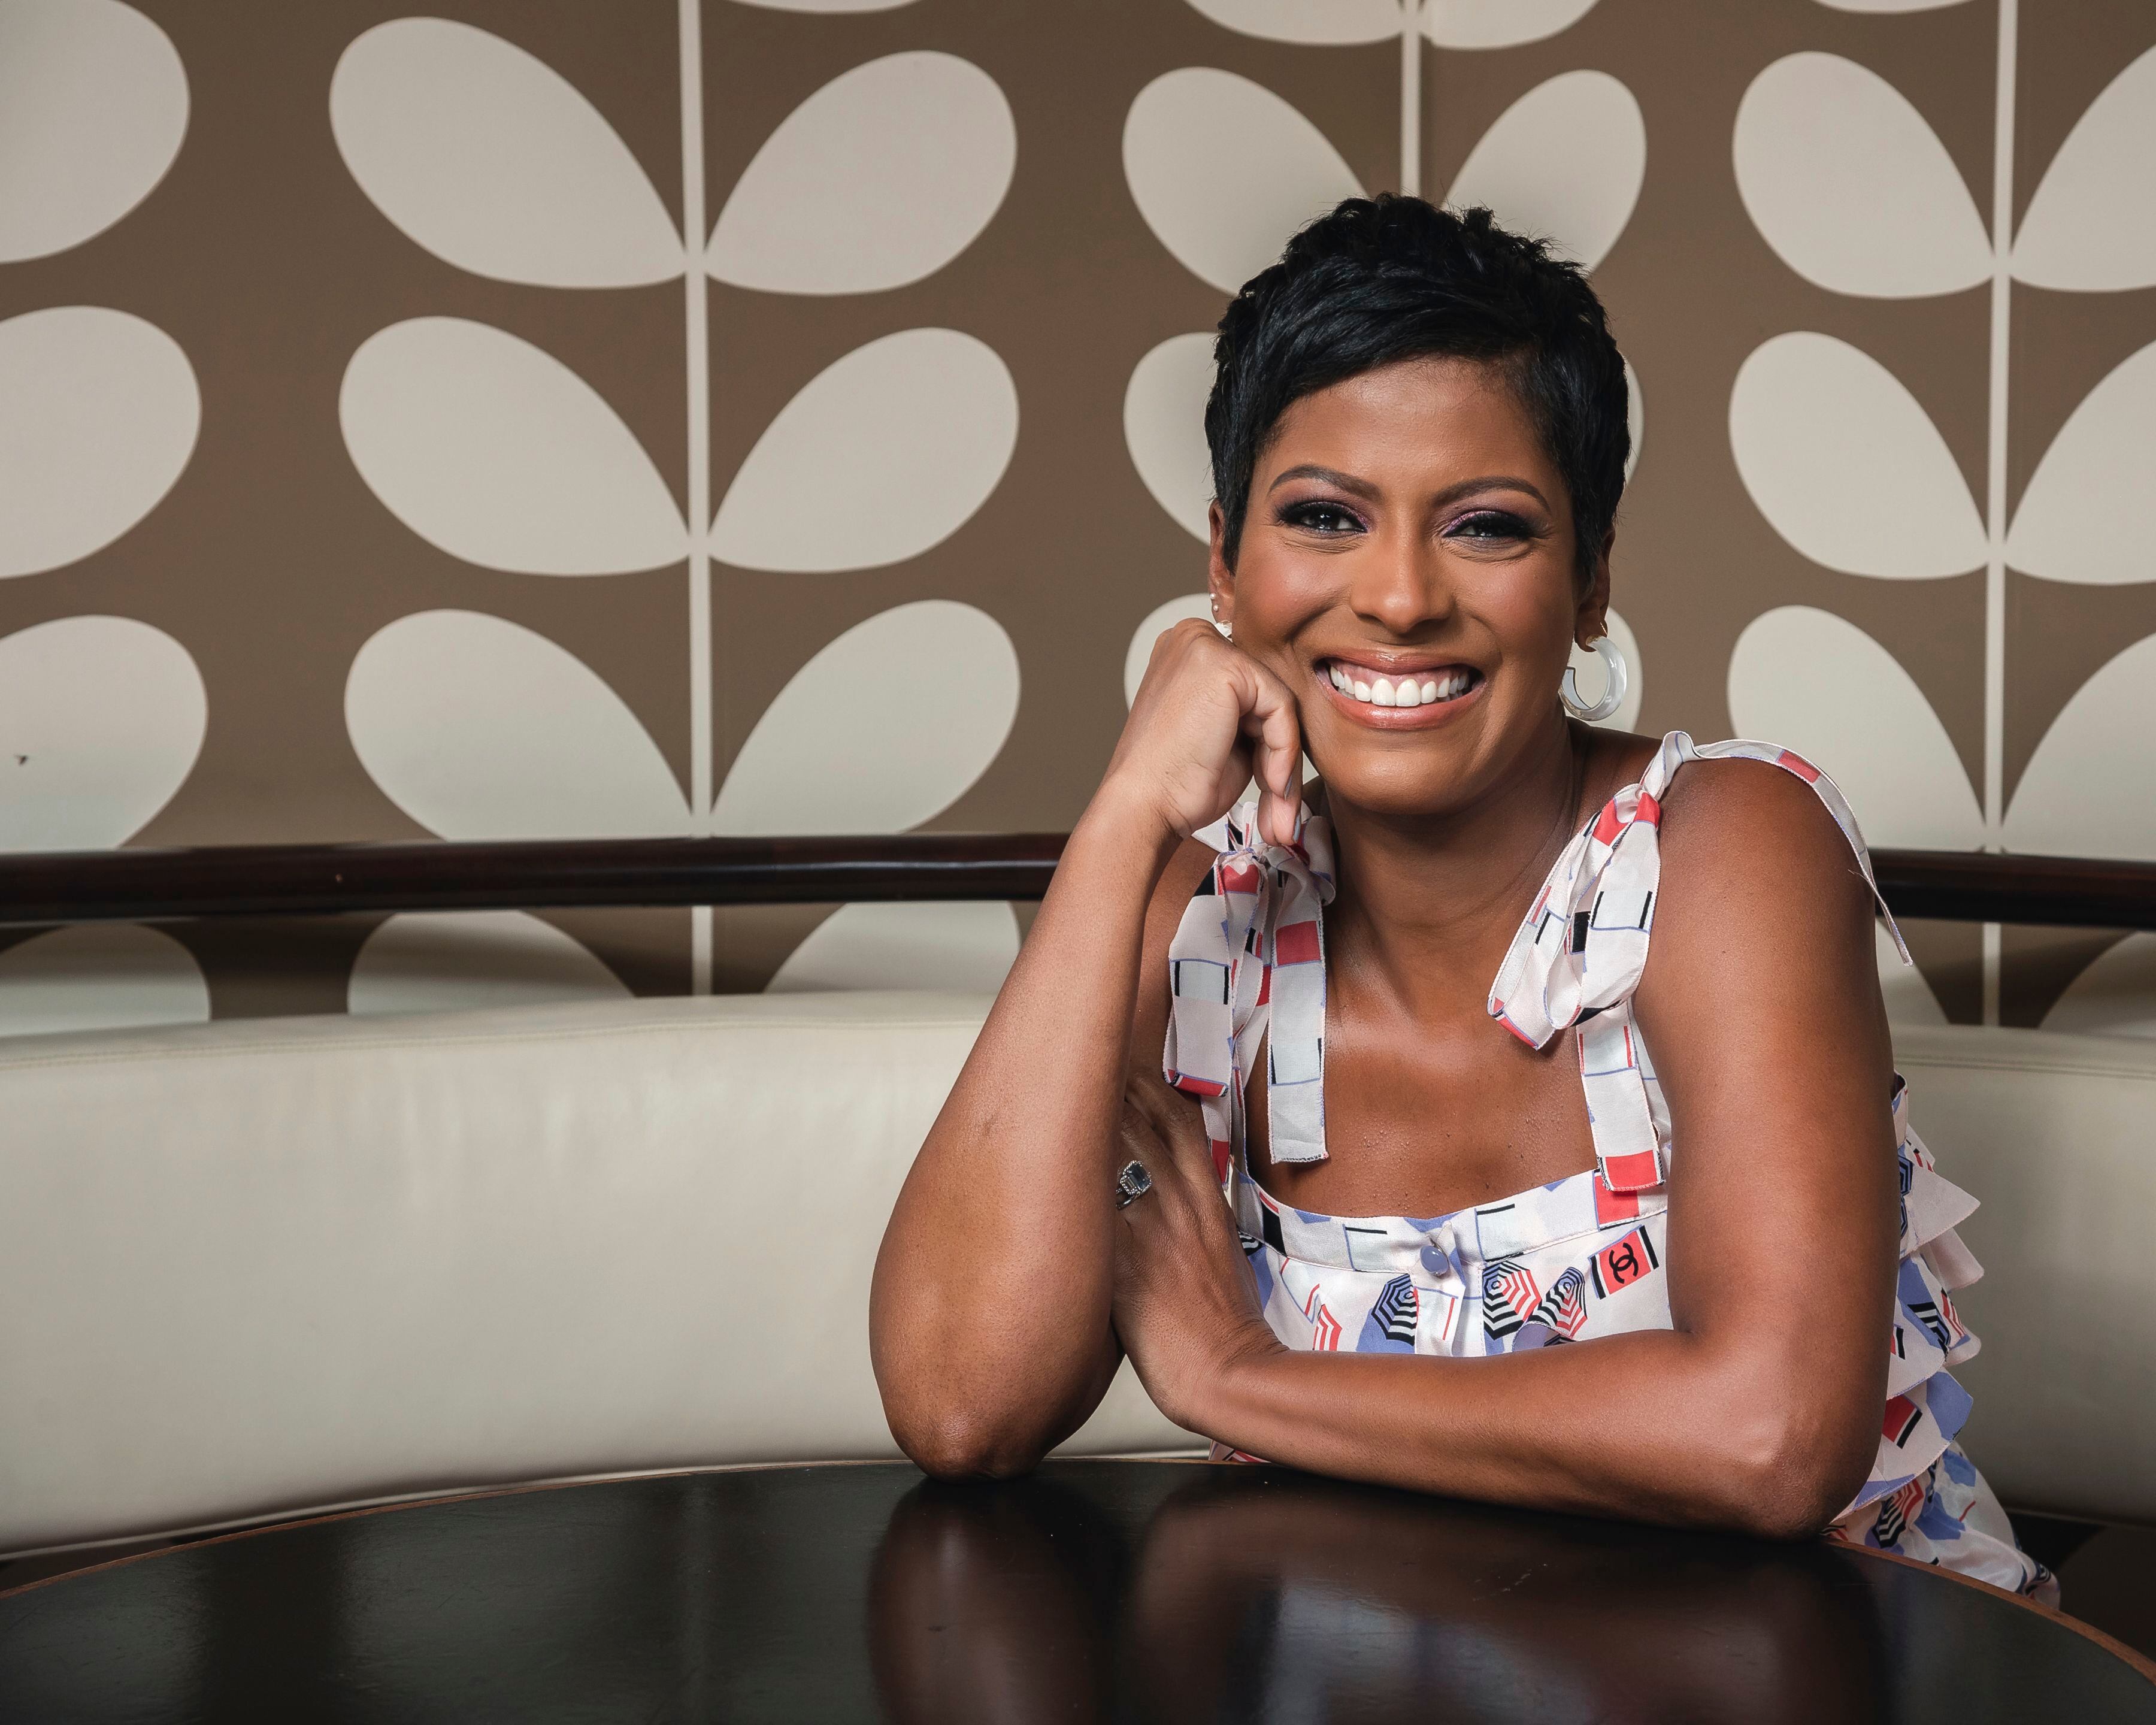 Tamron Hall show focuses on victims of ‘Someone They Knew’